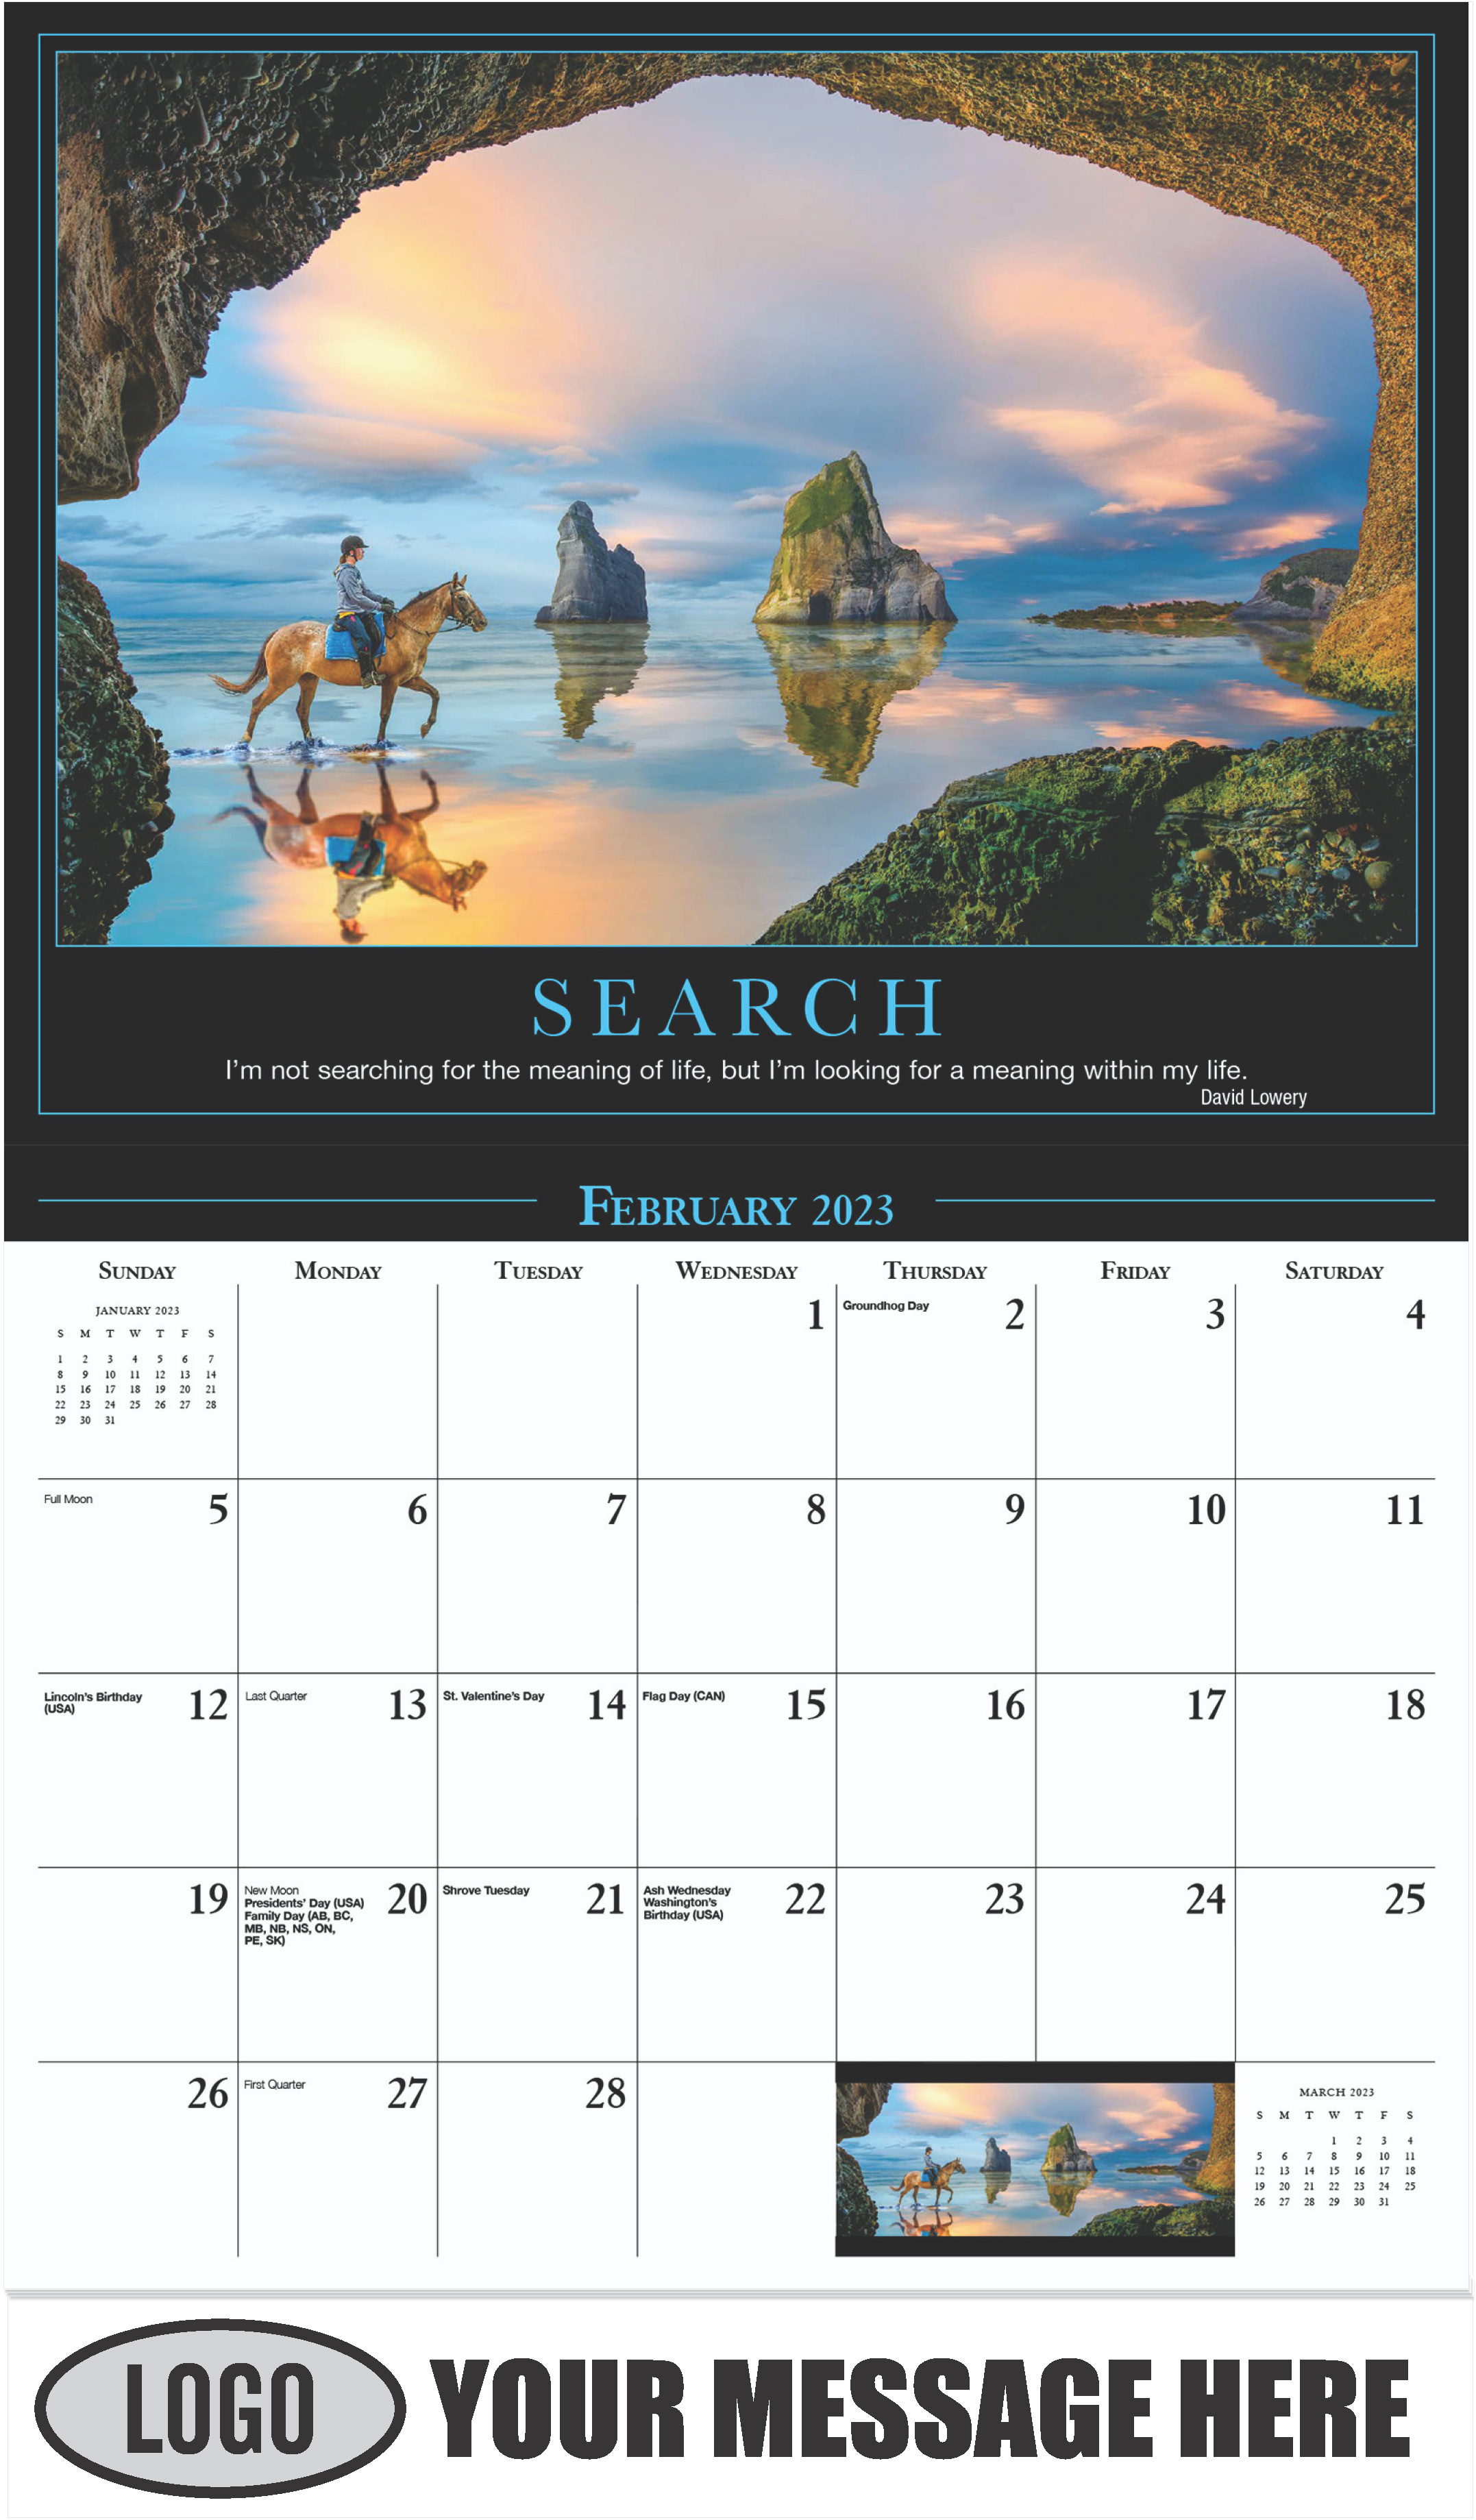 SEARCH ''I'm not searching for the meaning of life, but I'm looking for a meaning within my life.'' - David Lowery - February - Motivation 2023 Promotional Calendar